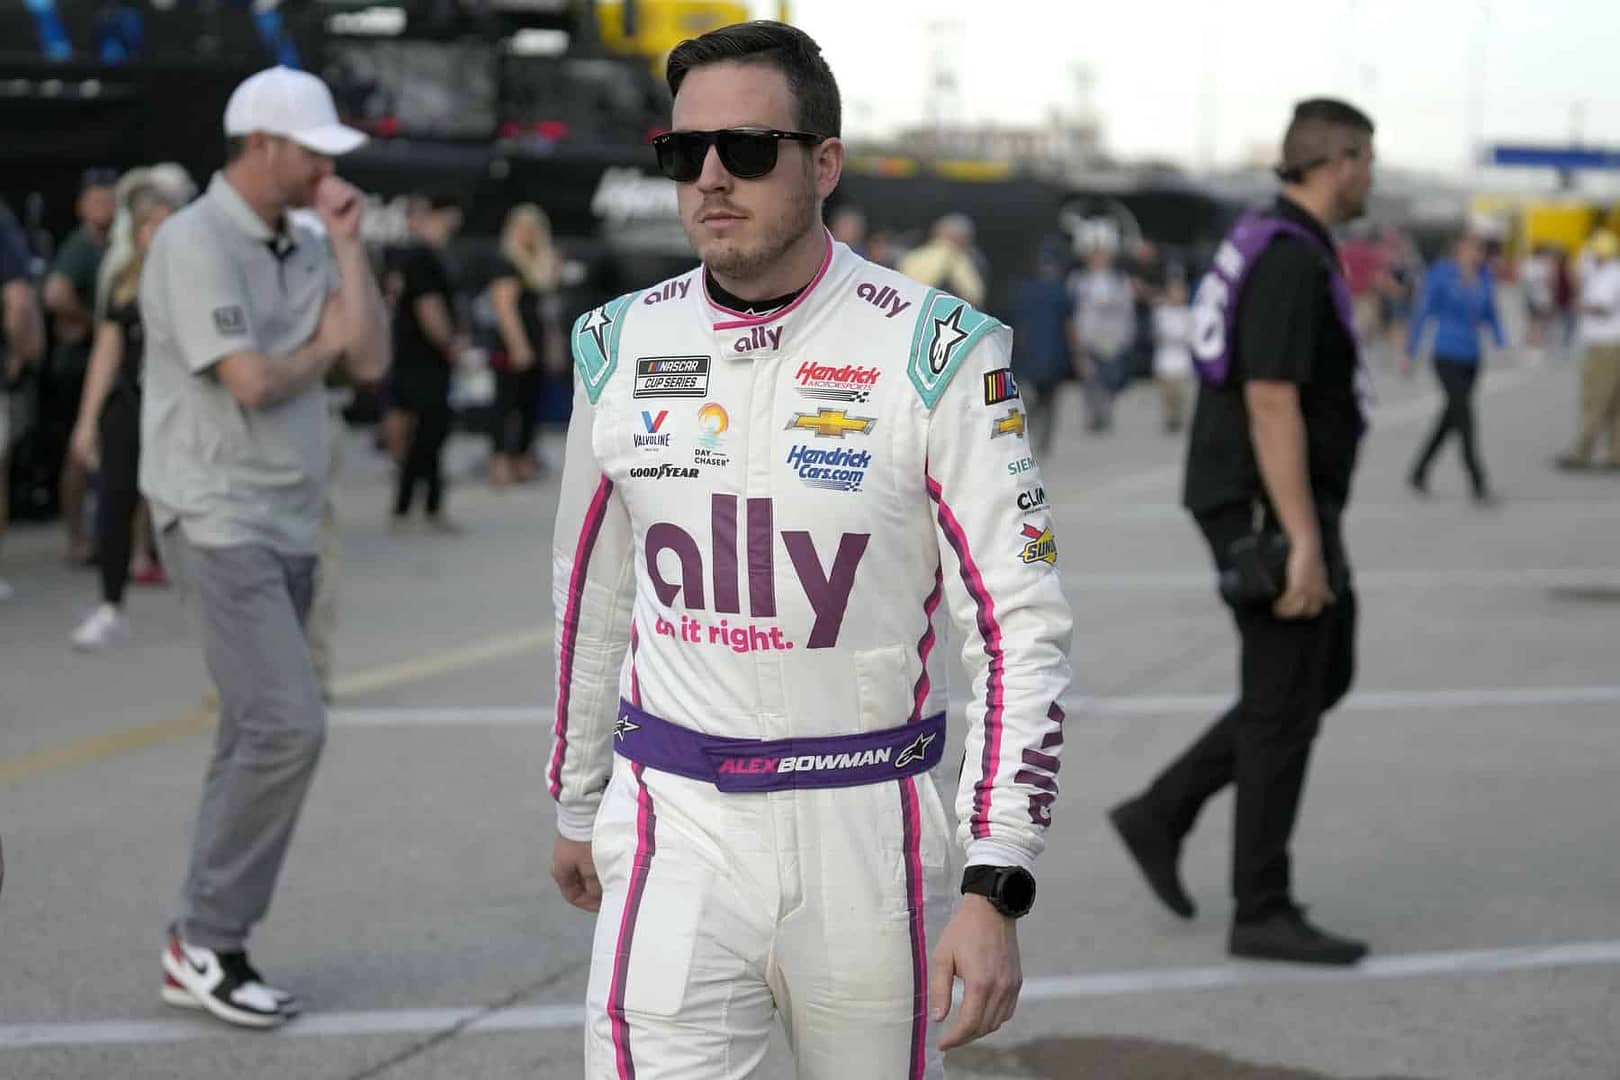 NASCAR's Enjoy Illinois 300 runs on Sunday. Our expert breaks down the best NASCAR matchup and prop bets for Gateway, including...